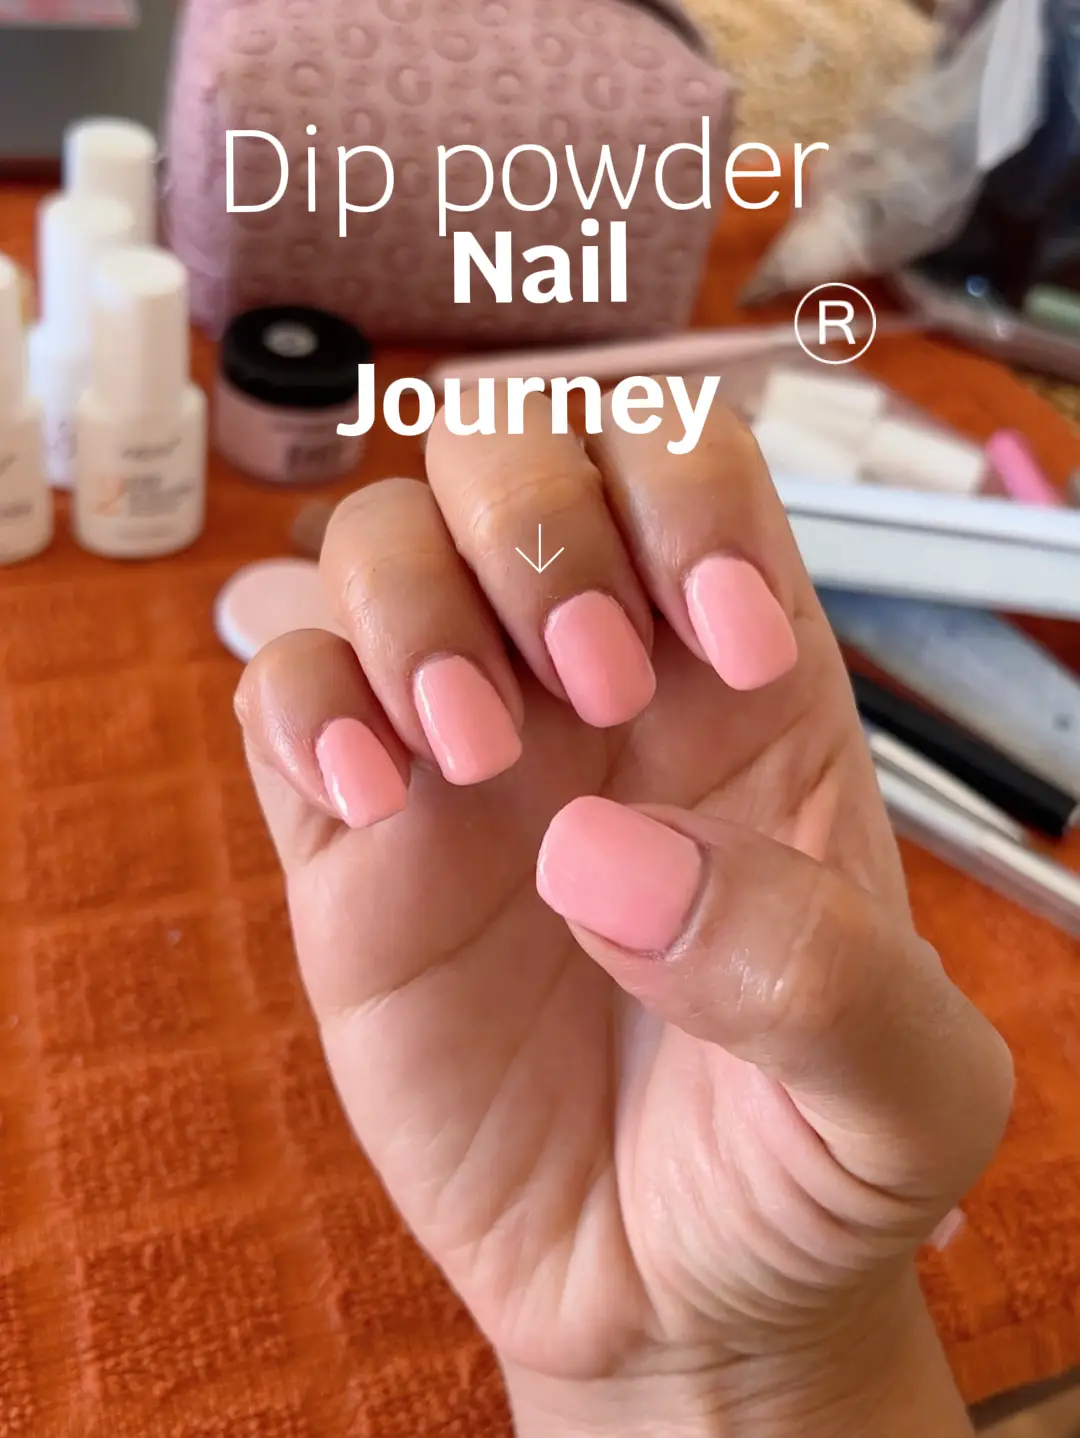 My nails - all OPI dip powder, Gallery posted by Denise Bozek